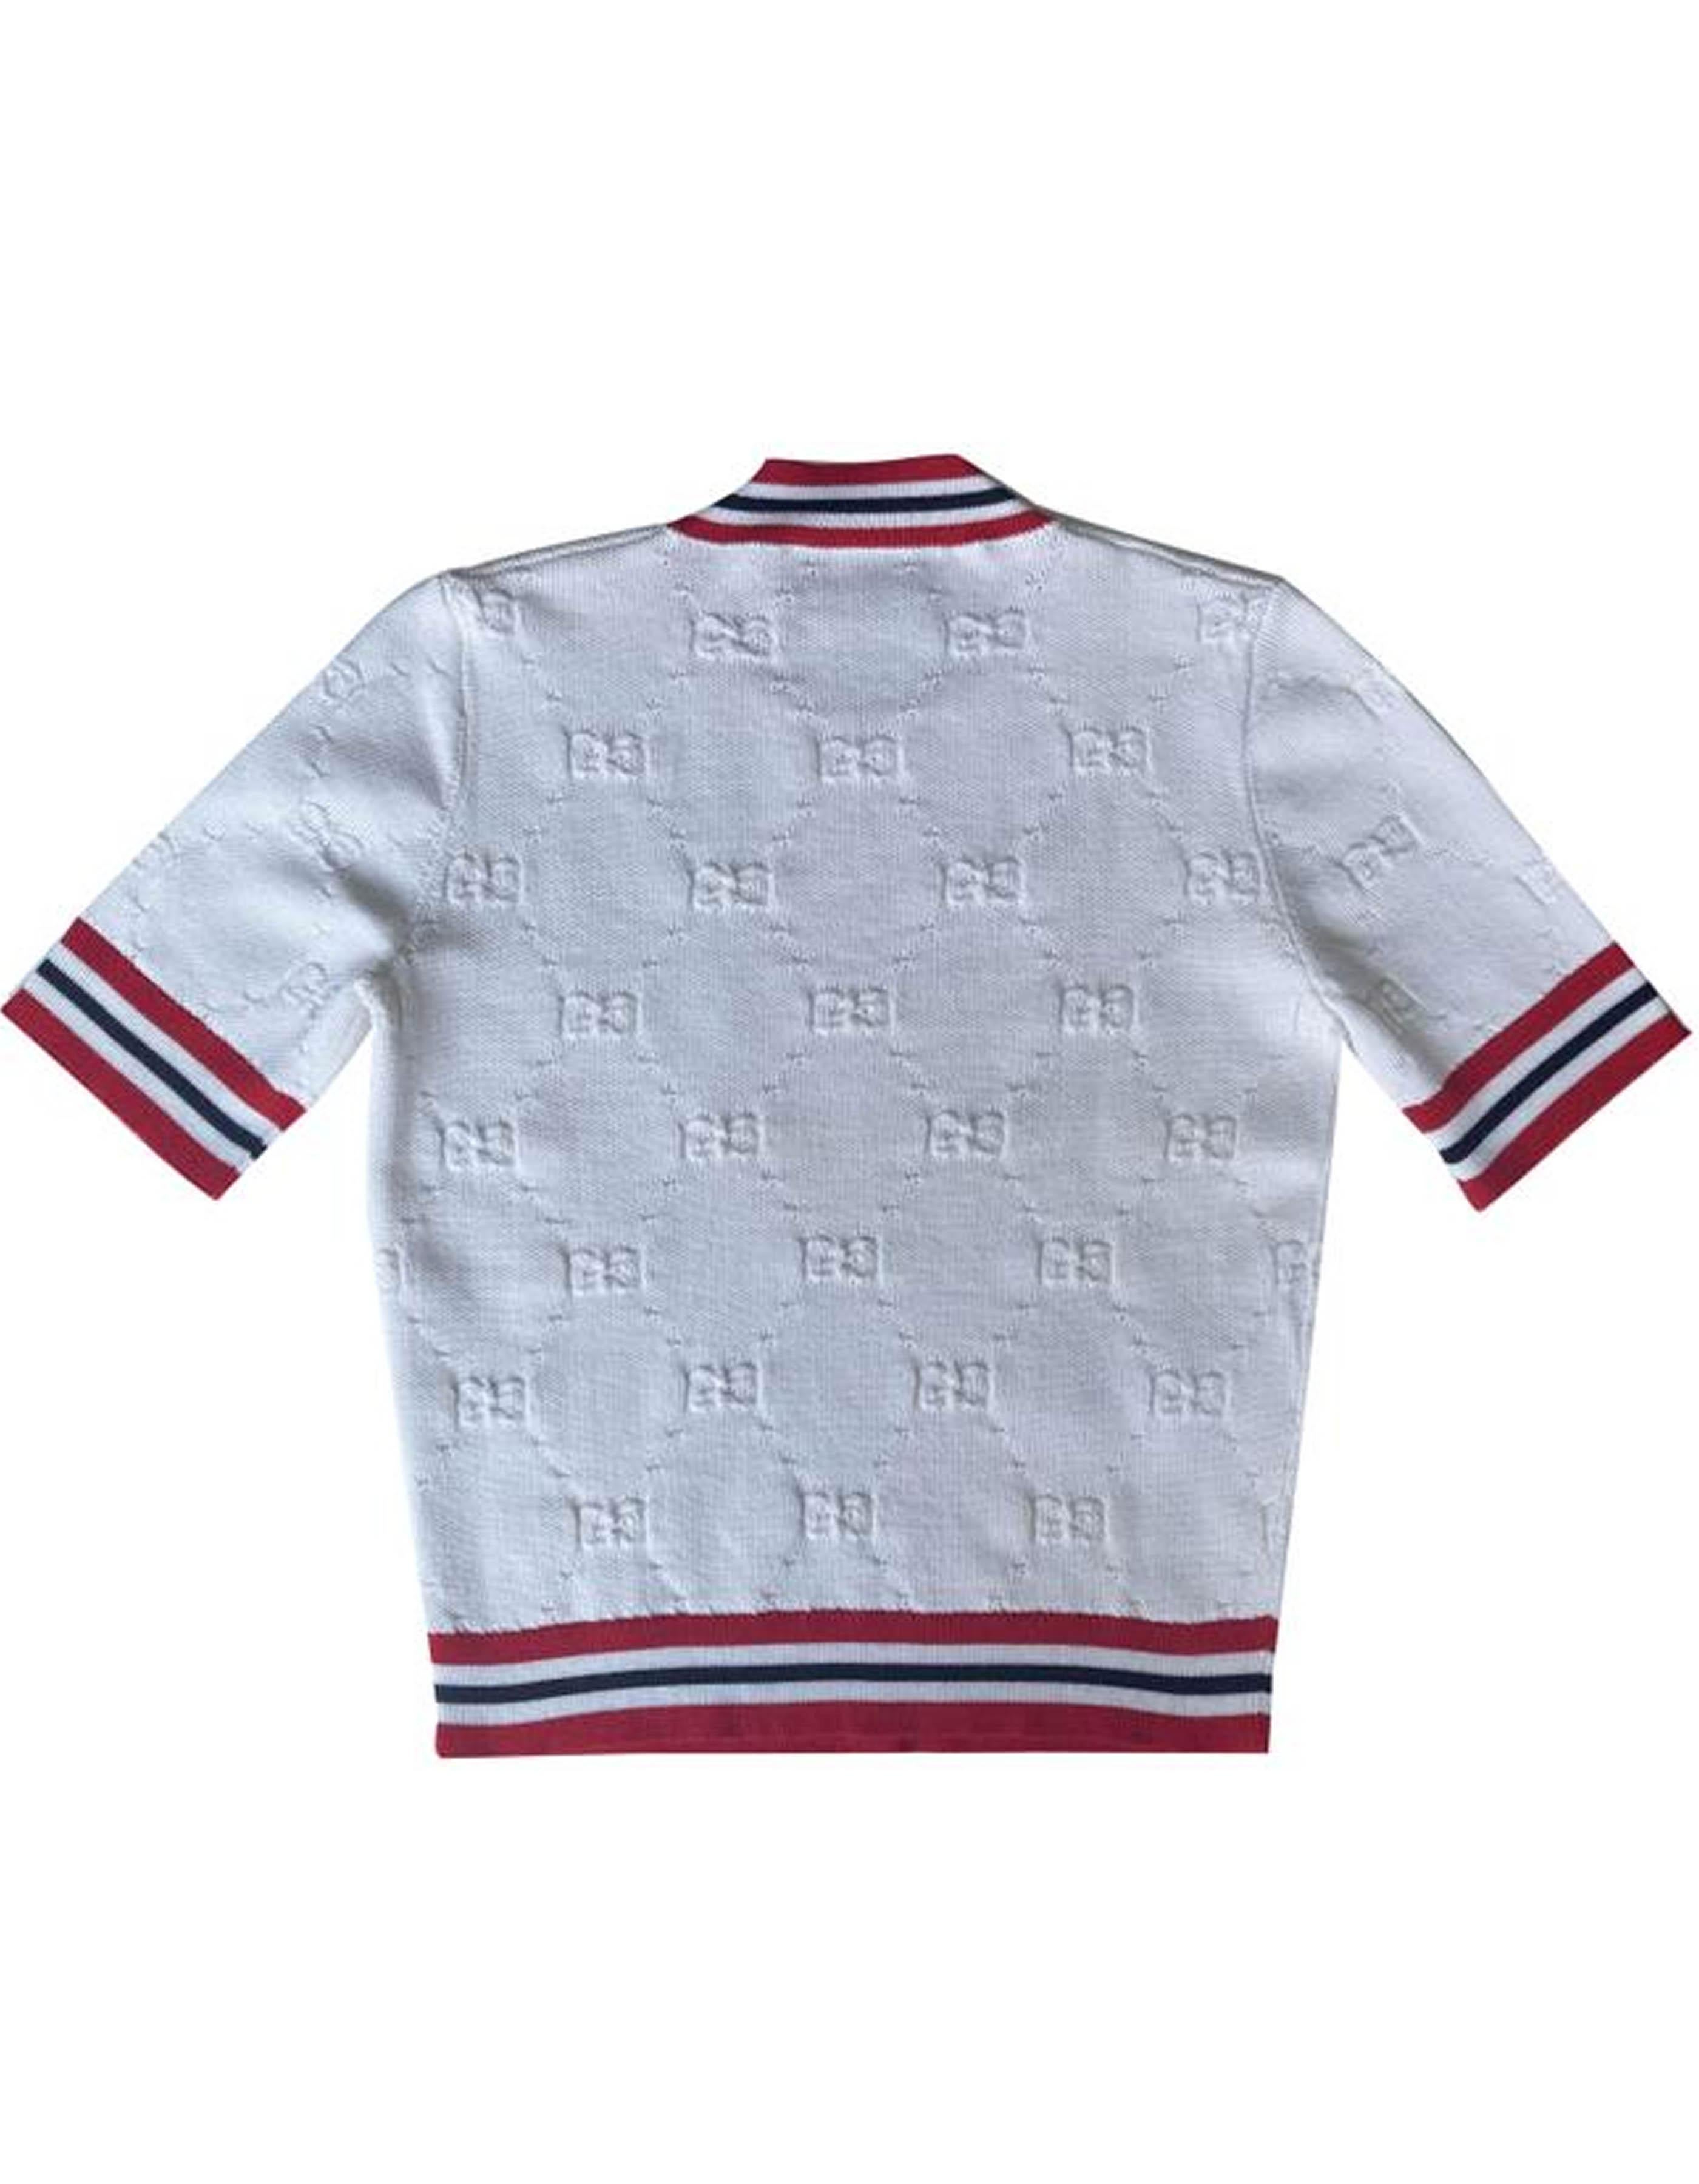 Gucci White GG Monogram Short-Sleeved Wool Blend Sweater sz XS. From the Fall/Winter 2019 Collection by Alessandro Michele

Made In: Italy
Year of Production: 2019
Color: White with red and navy Sylvie web trim
Materials: 69% wool, 29% silk, 1%